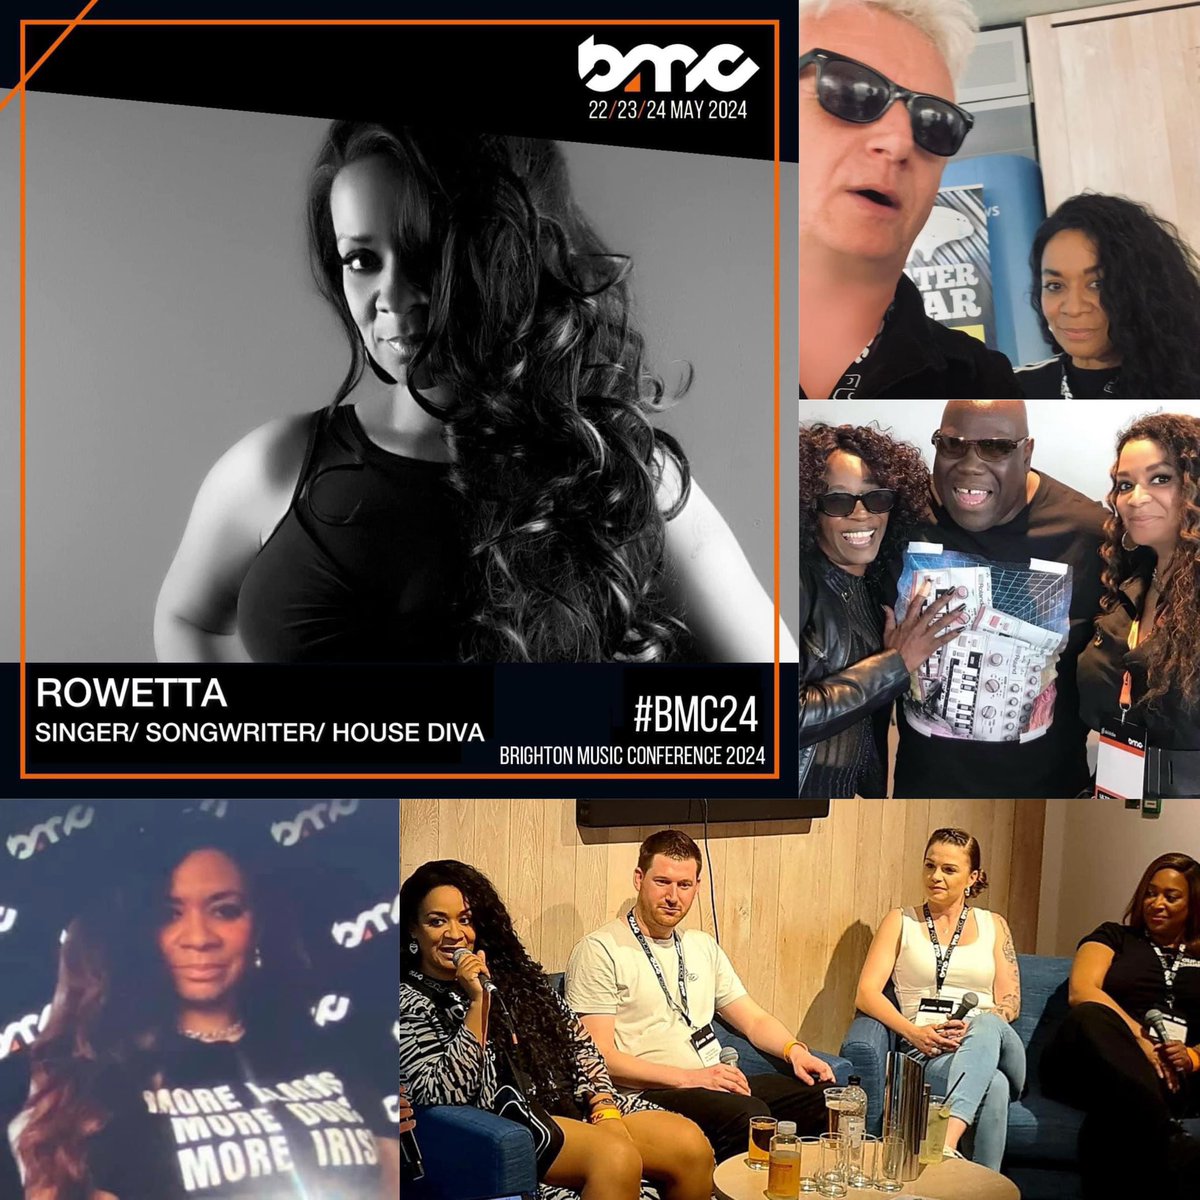 Great to catch up here in Ibiza with so many friends, collaborators & future collaborators in this beautiful music indudstry of ours. Can’t wait to do it again at @BrightonMusicCo in May, where I’ll be one of the speakers/ singers. See you at #BMC24 🎶🧡🖤🤍